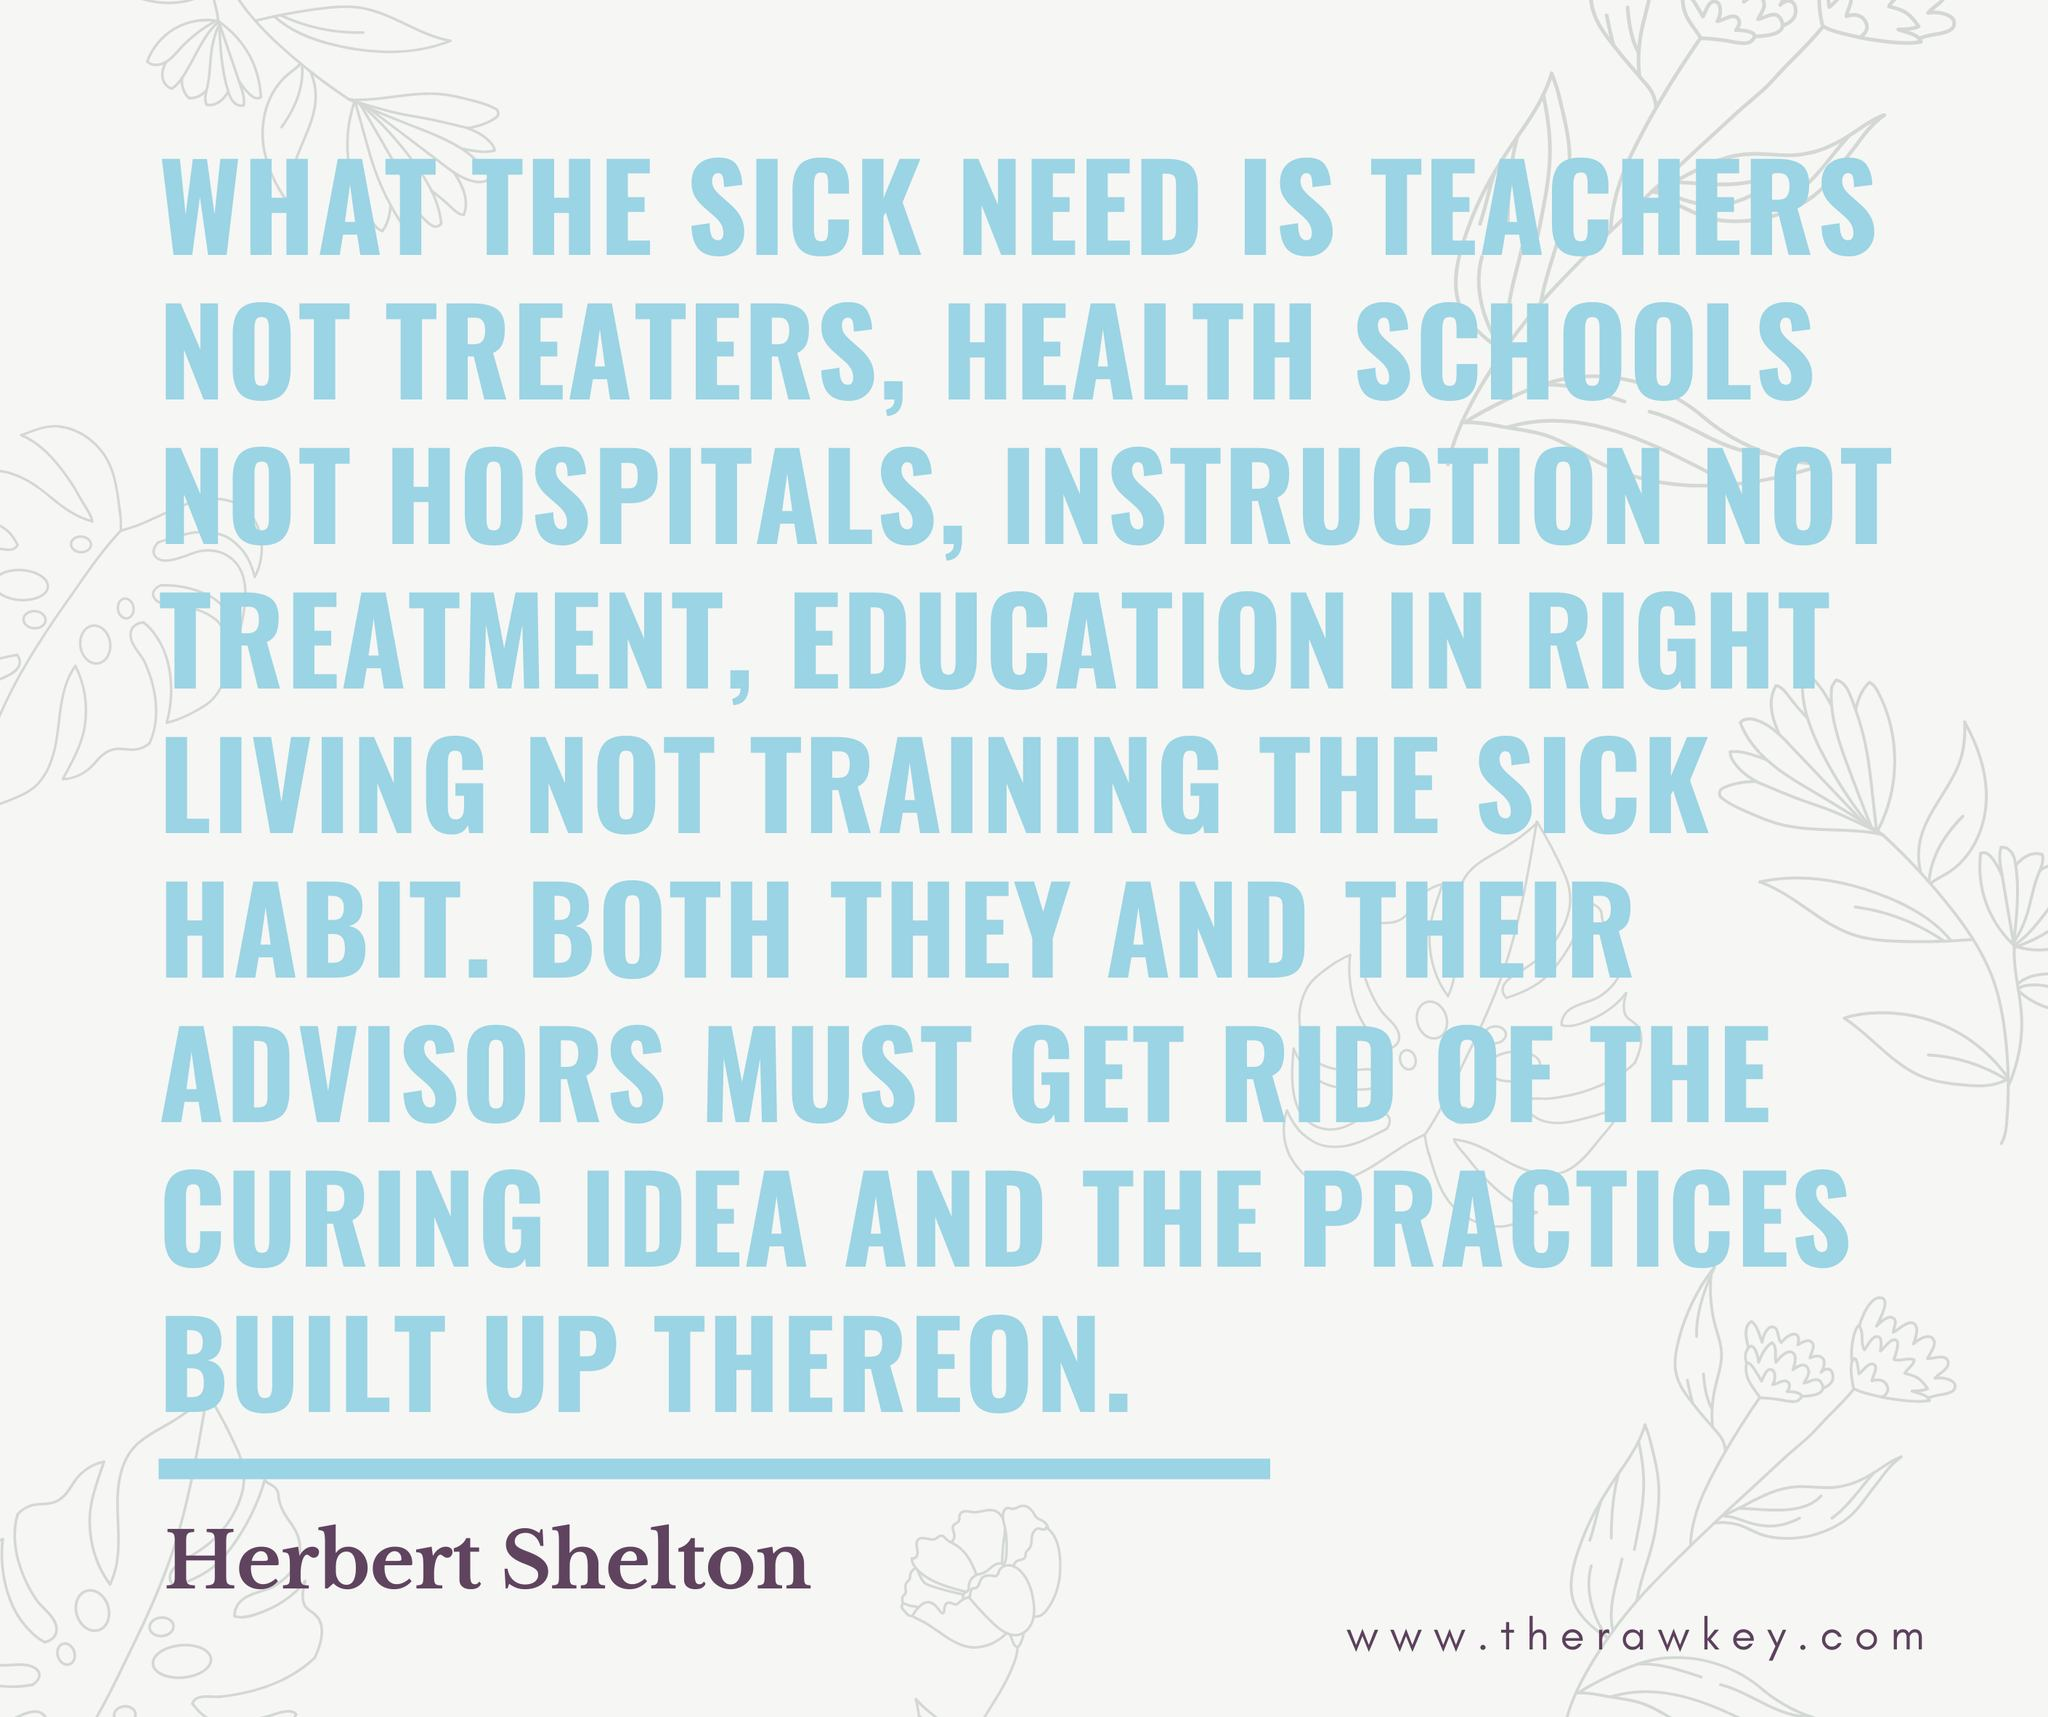 Quote:  "What the sick need is teachers not treaters, health schools not hospitals, instruction not treatment, education in right living not training the sick habit.  Both they and their advisors must get rid of the curing idea and the practices built up thereon. " - Herbert Shelton 